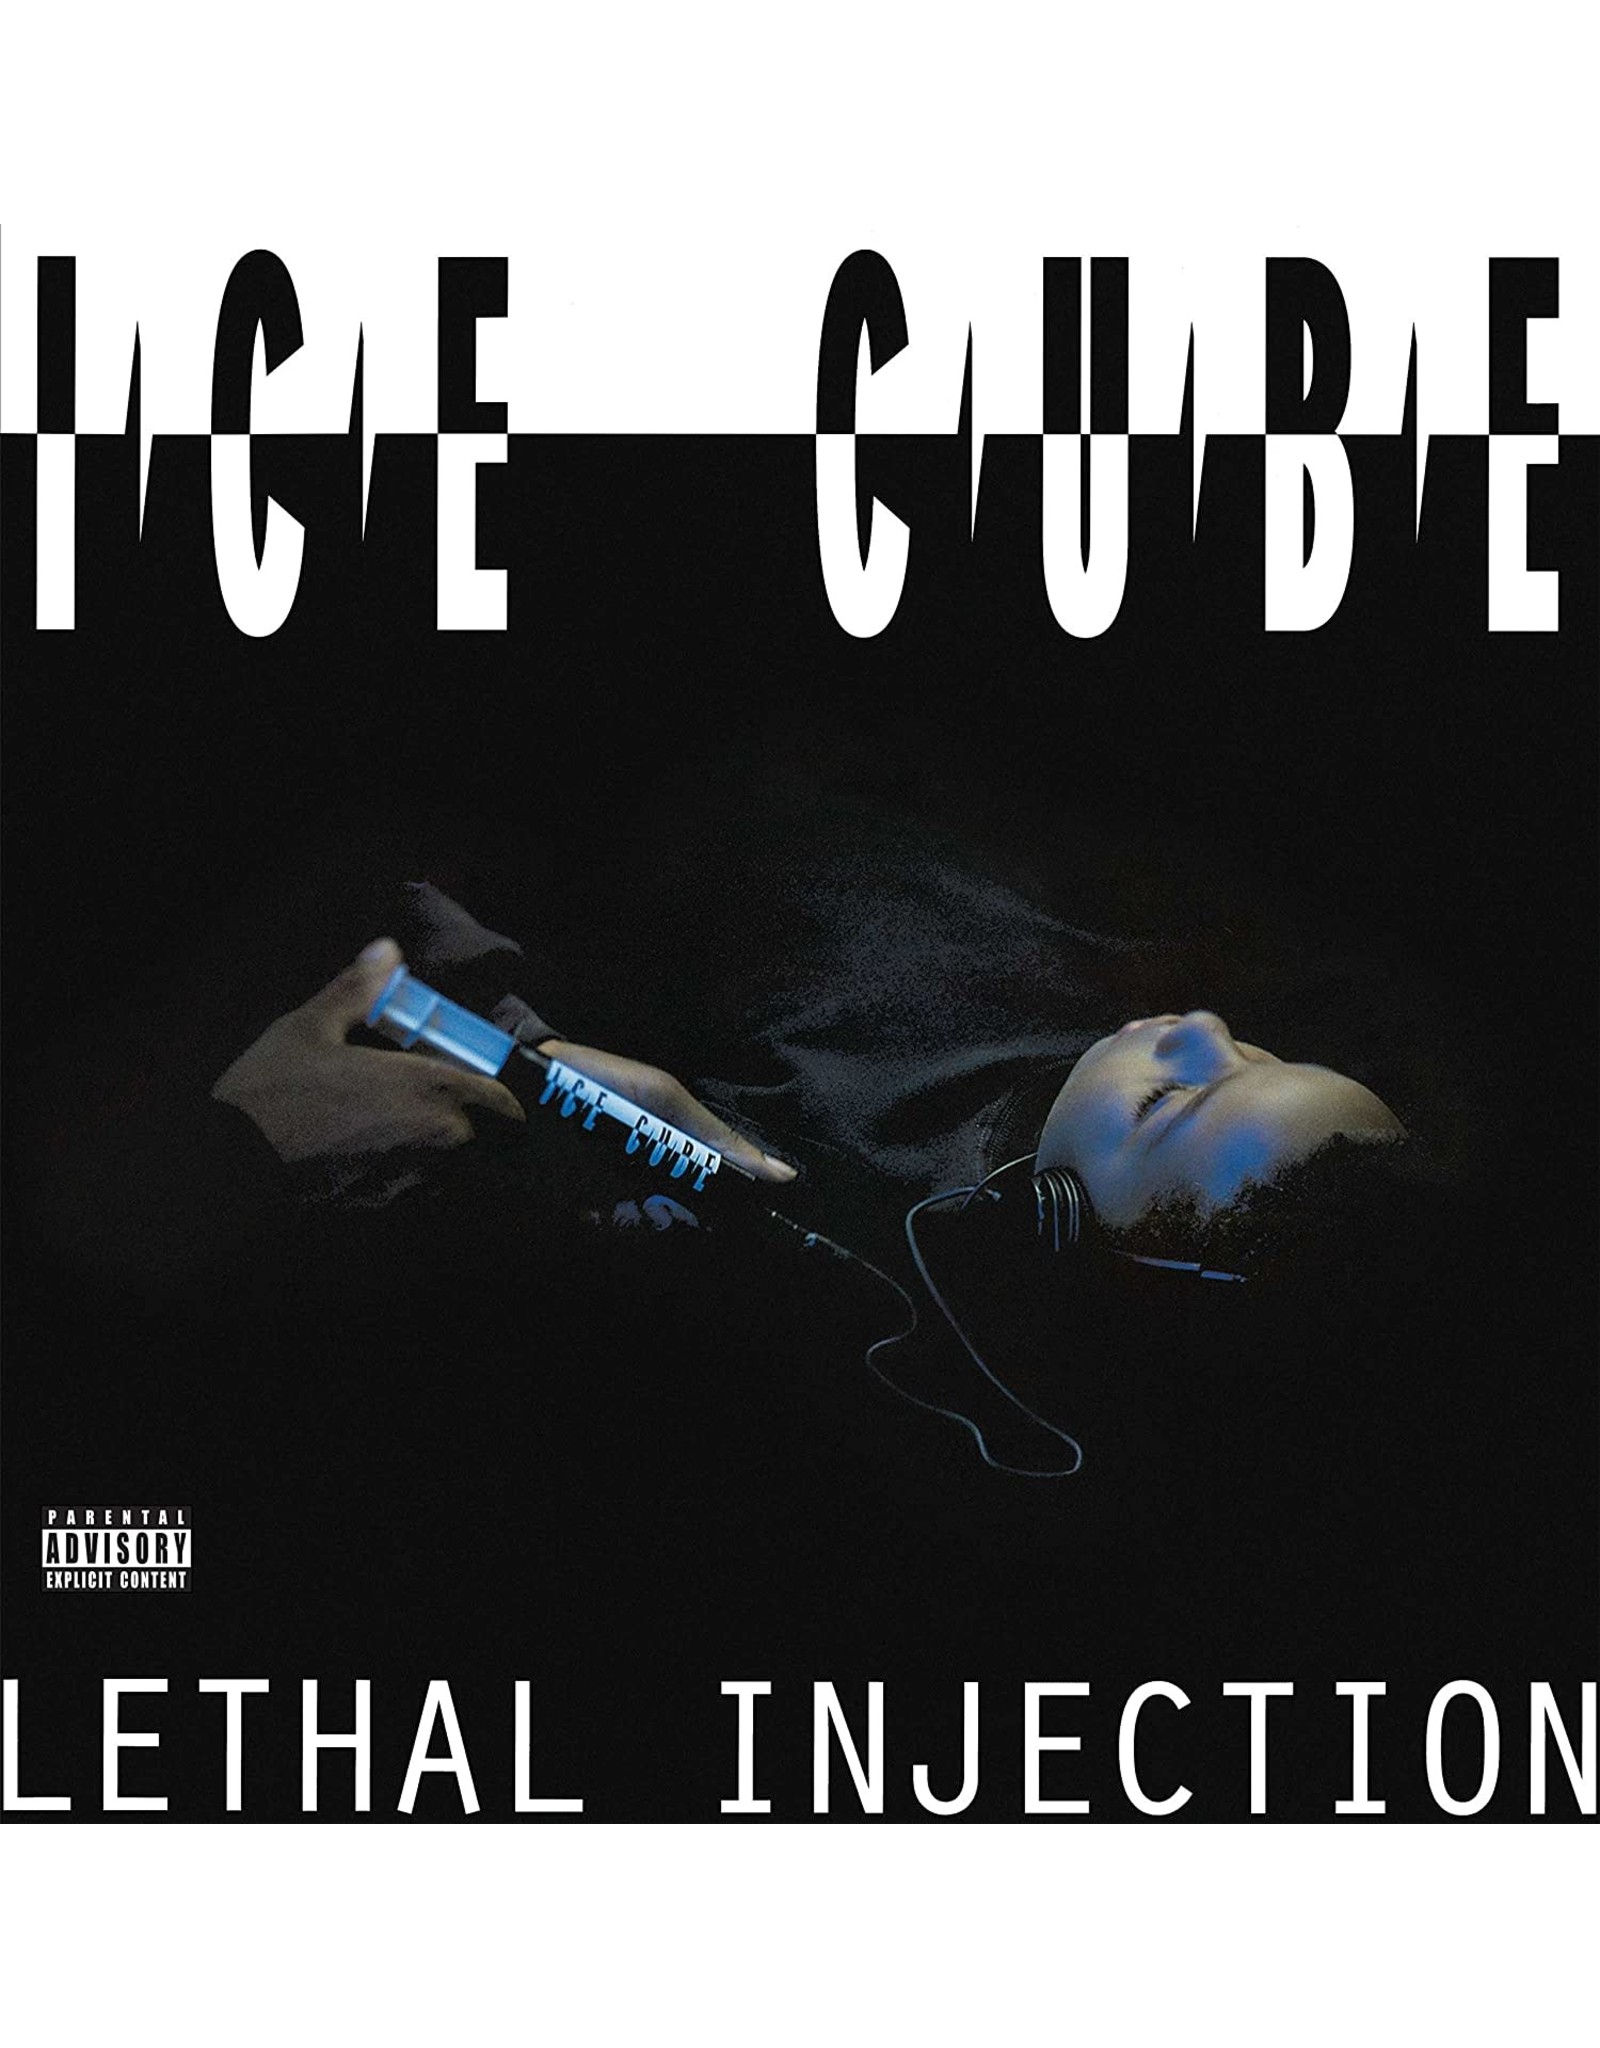 Ice Cube - Lethal Injection